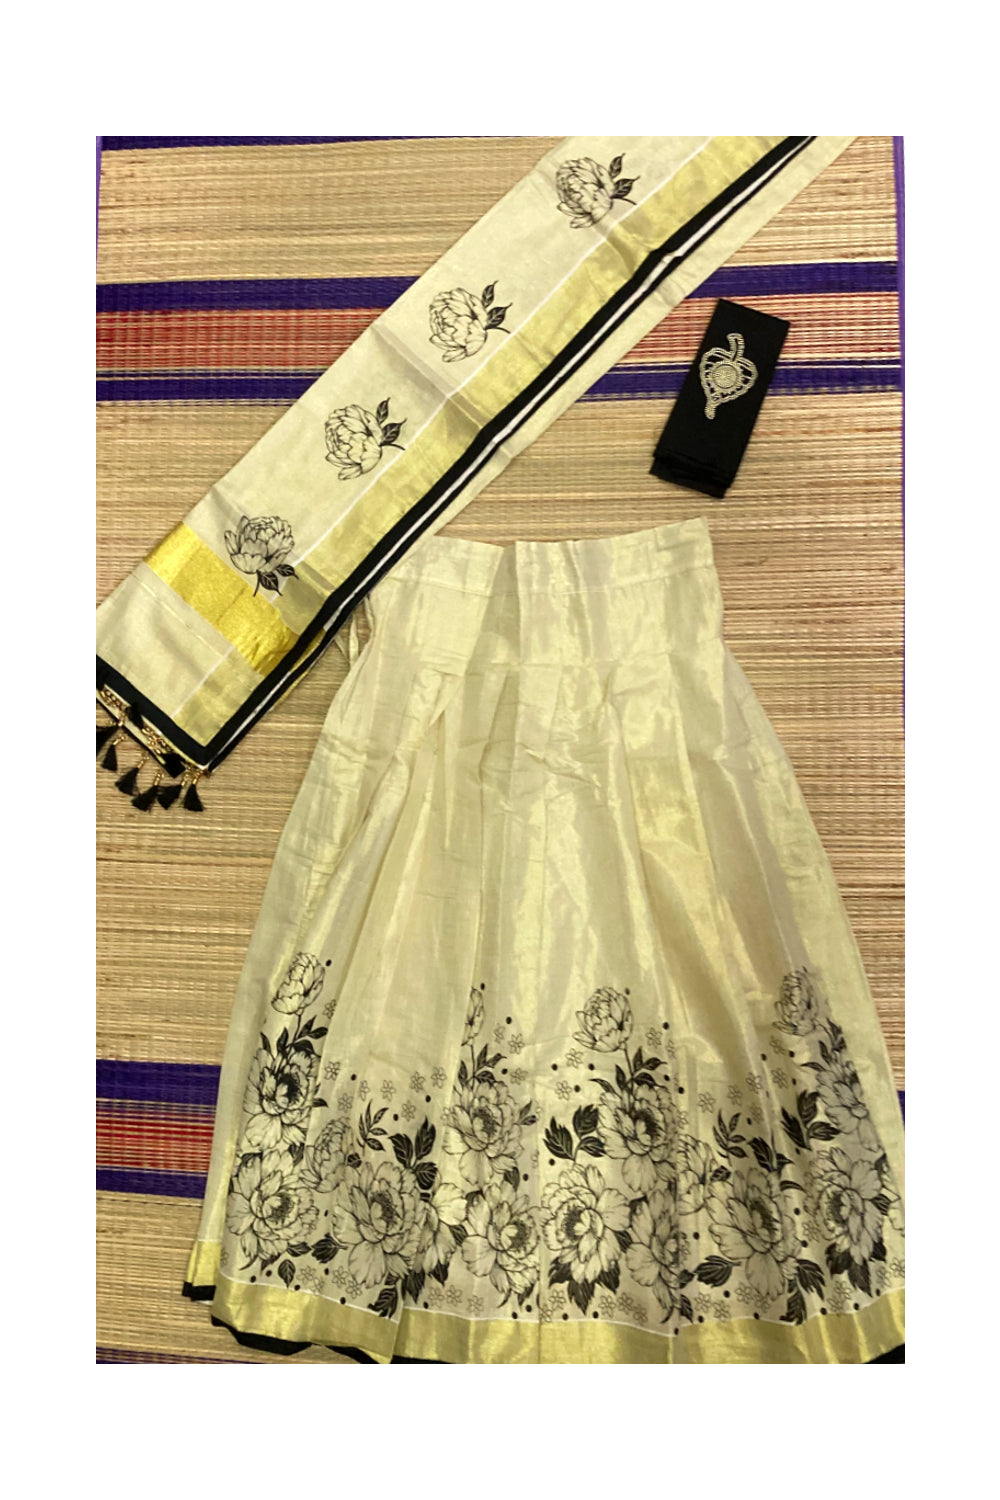 Kerala Tissue Semi Stitched Dhavani Set with Black Floral Mural Printed Design and Black Blouse Piece